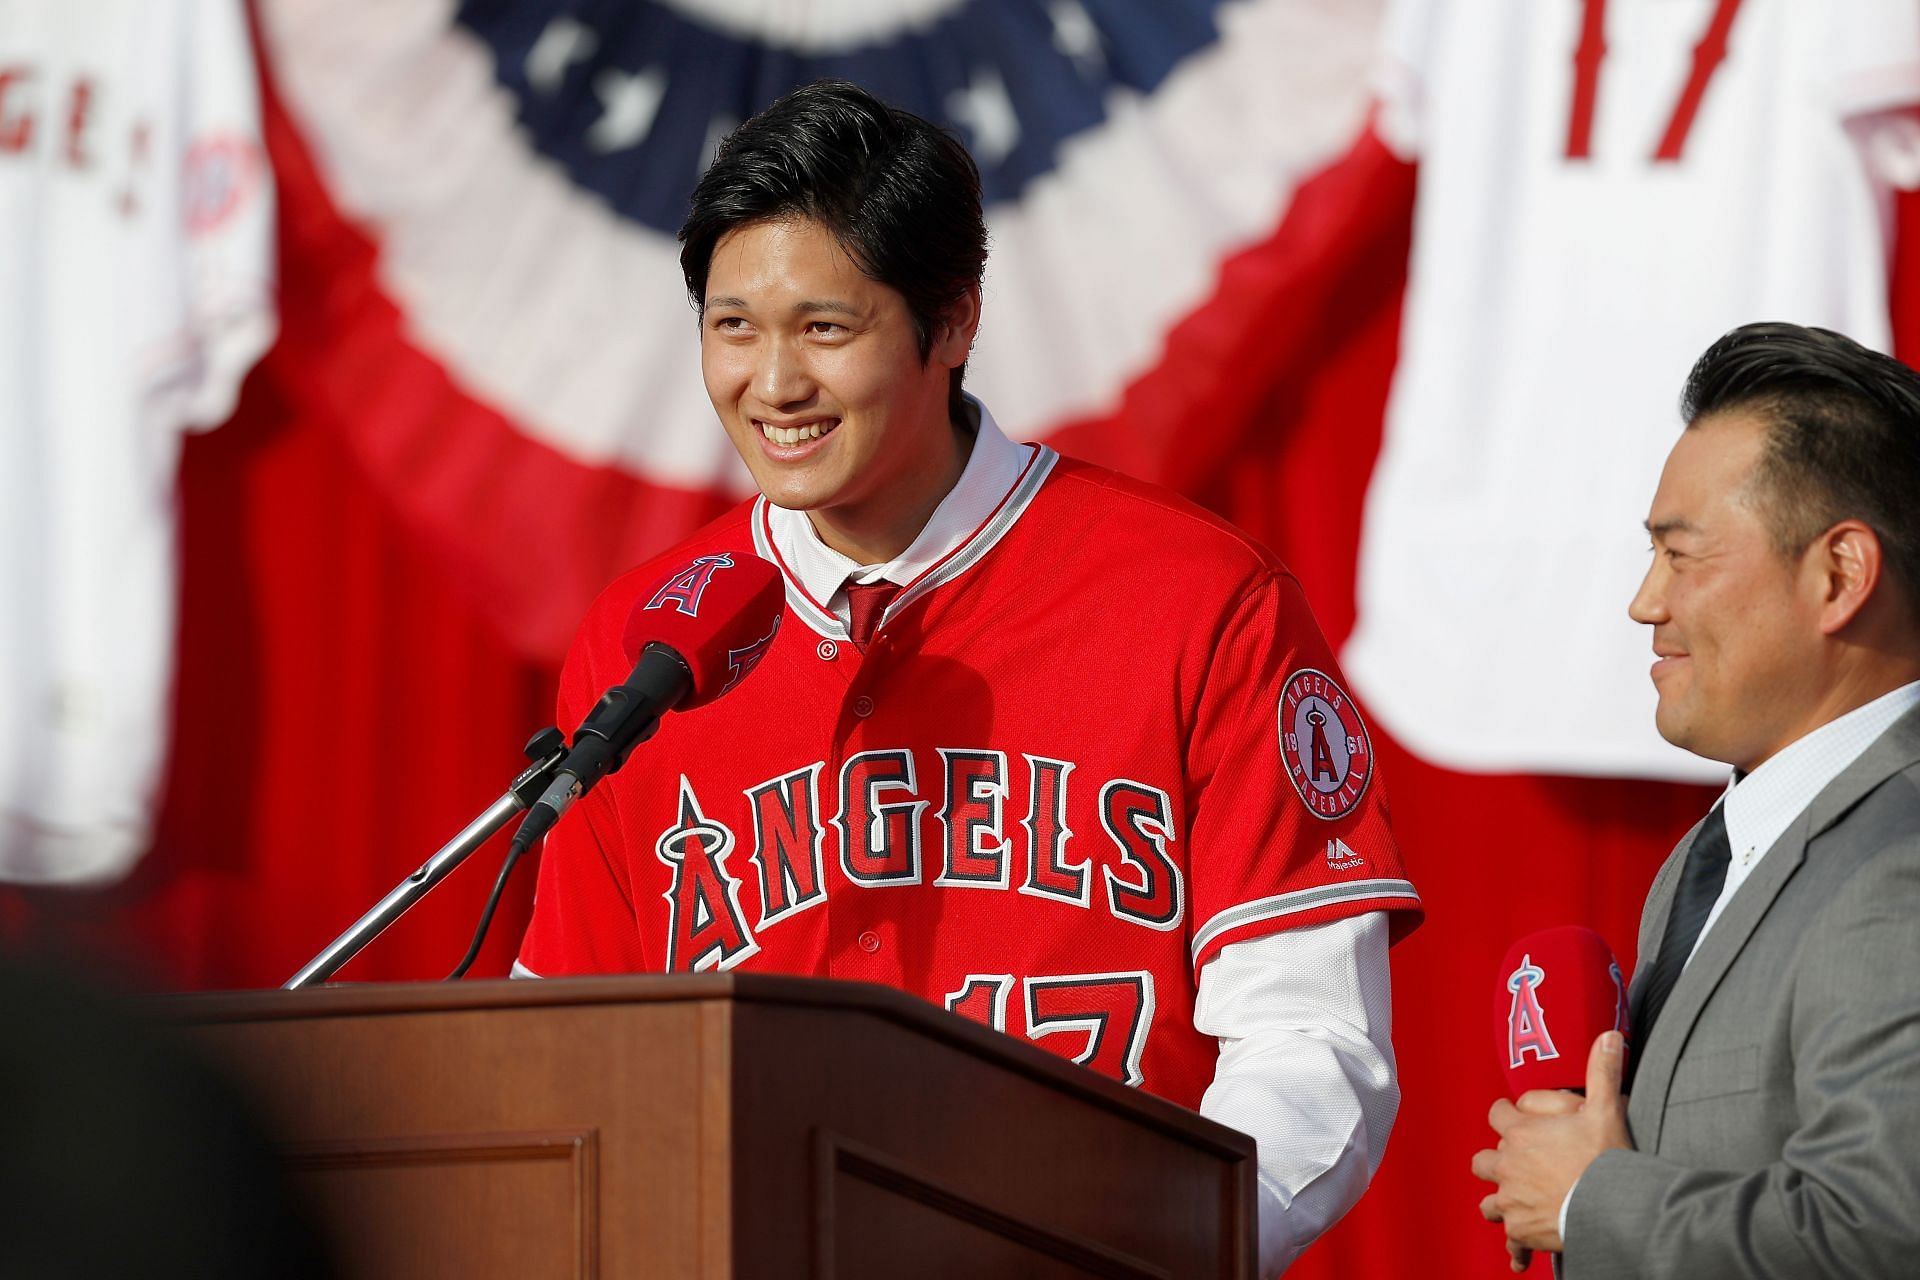 Young Japanese people (ages 12-21) chose Shohei Ohtani (22.3%) as